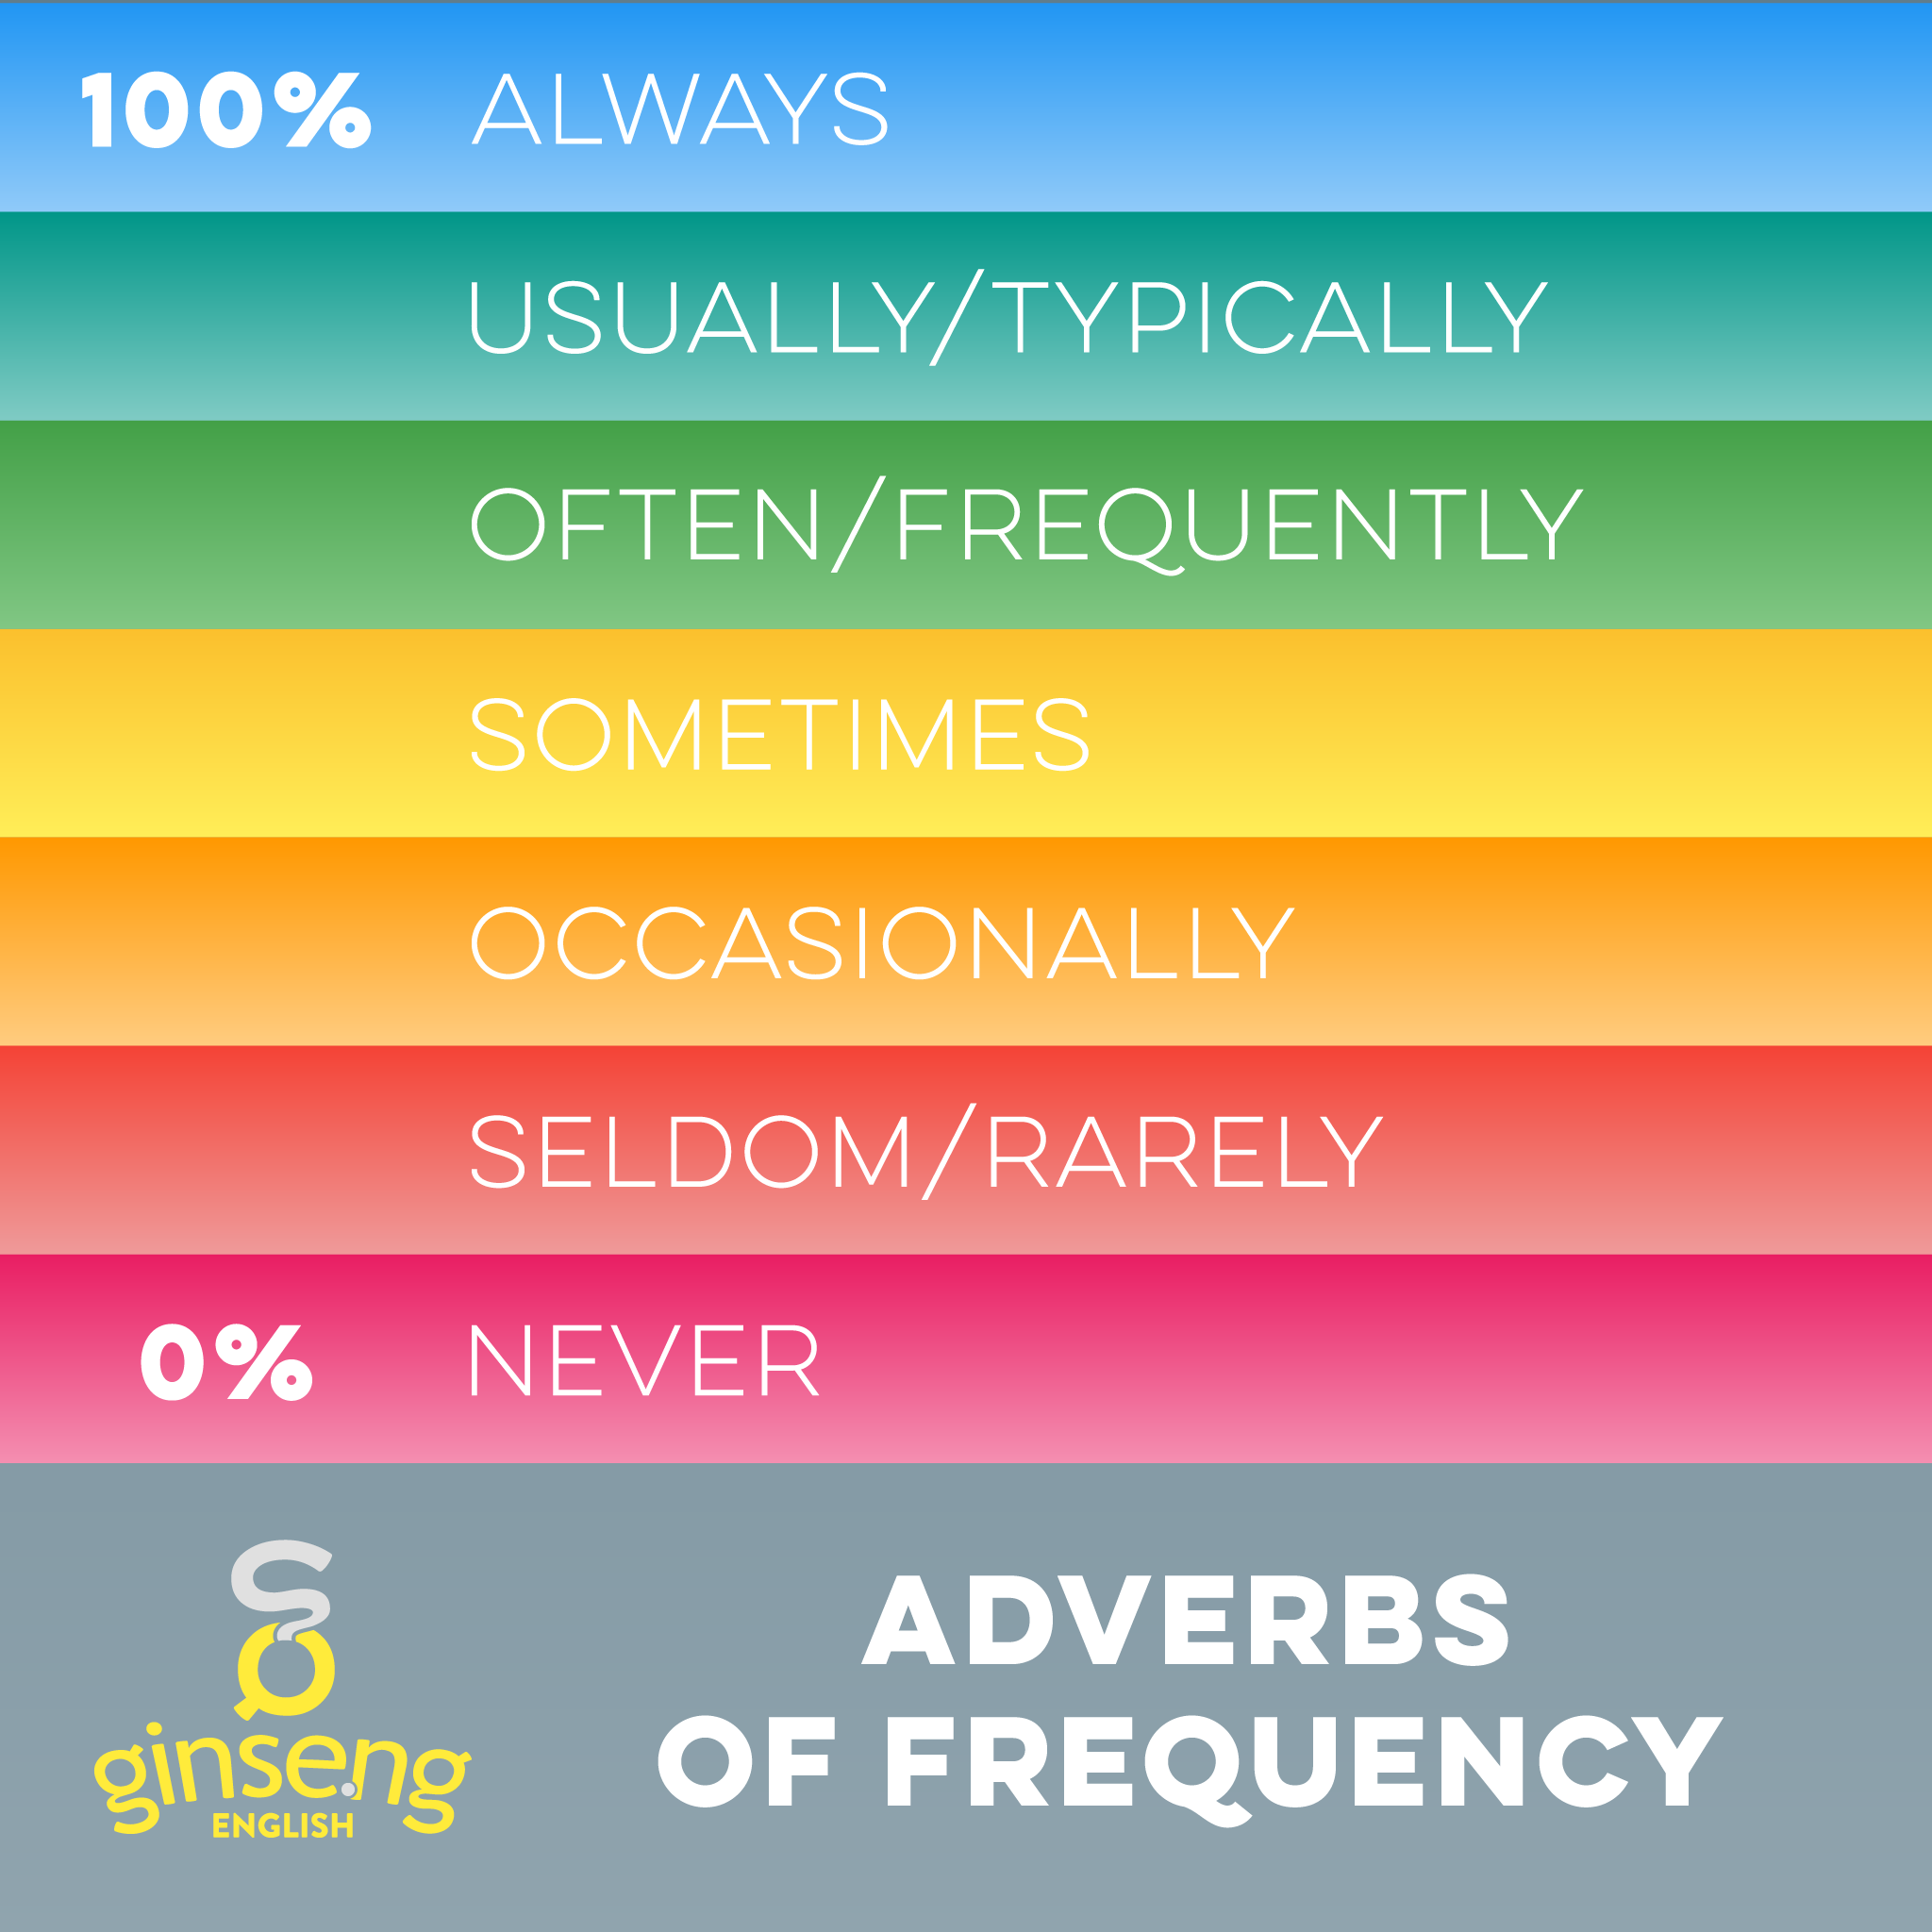 Adverbs of frequency wordwall. Frequently often разница. Rarely seldom разница. Seldom rarely usually. Always usually frequently.